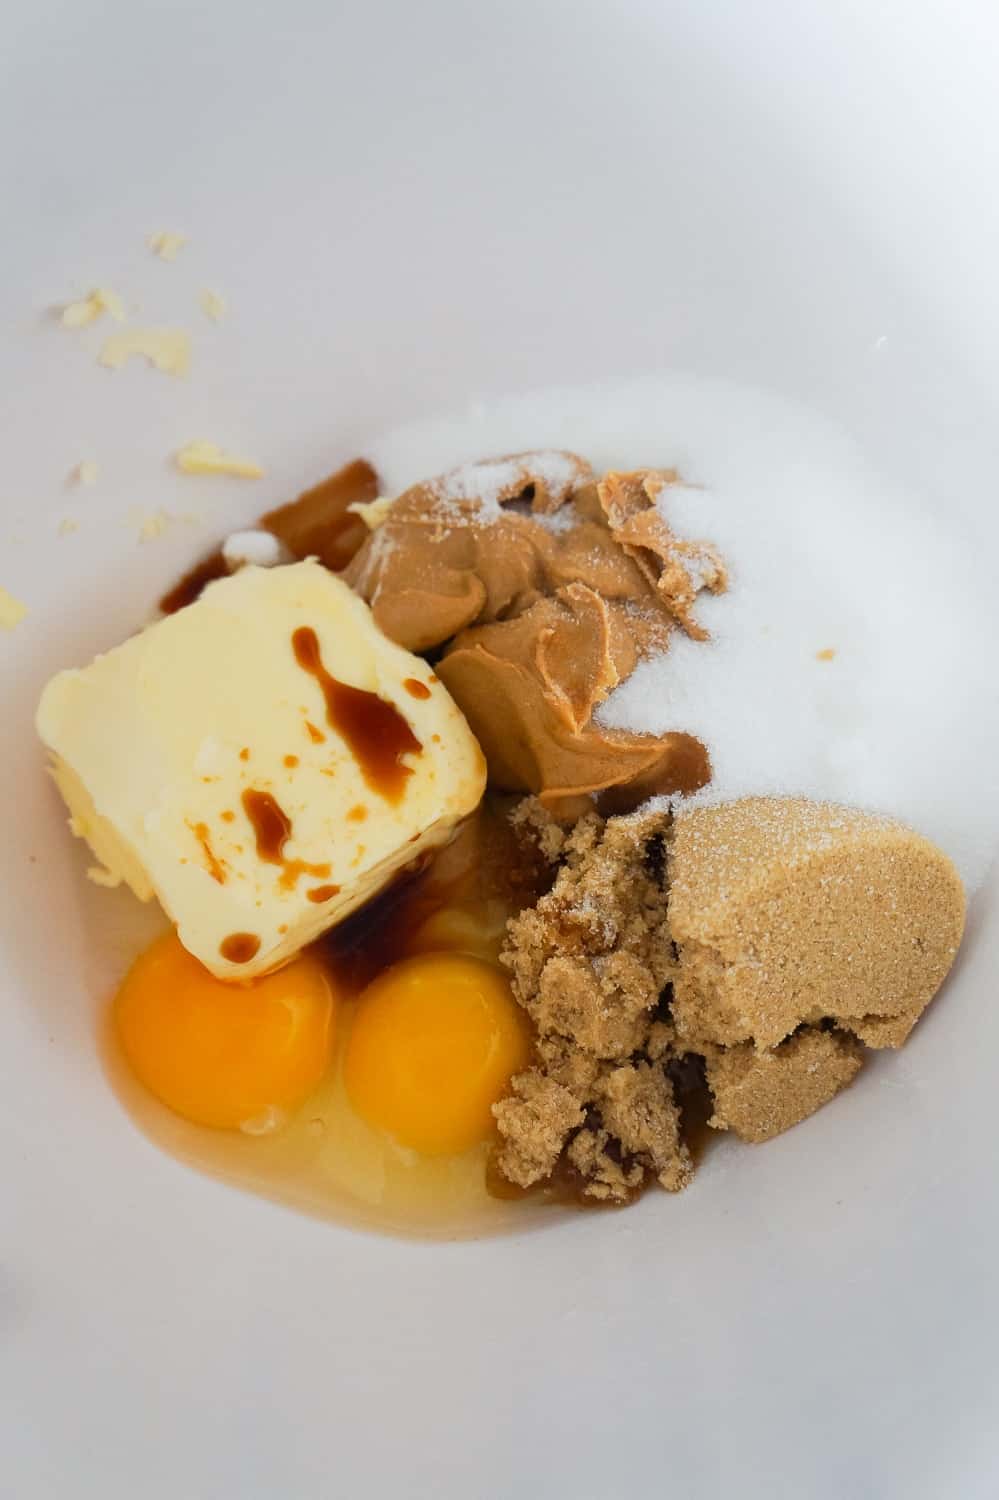 butter, peanut butter, eggs, brown sugar and white sugar in a mixing bowl